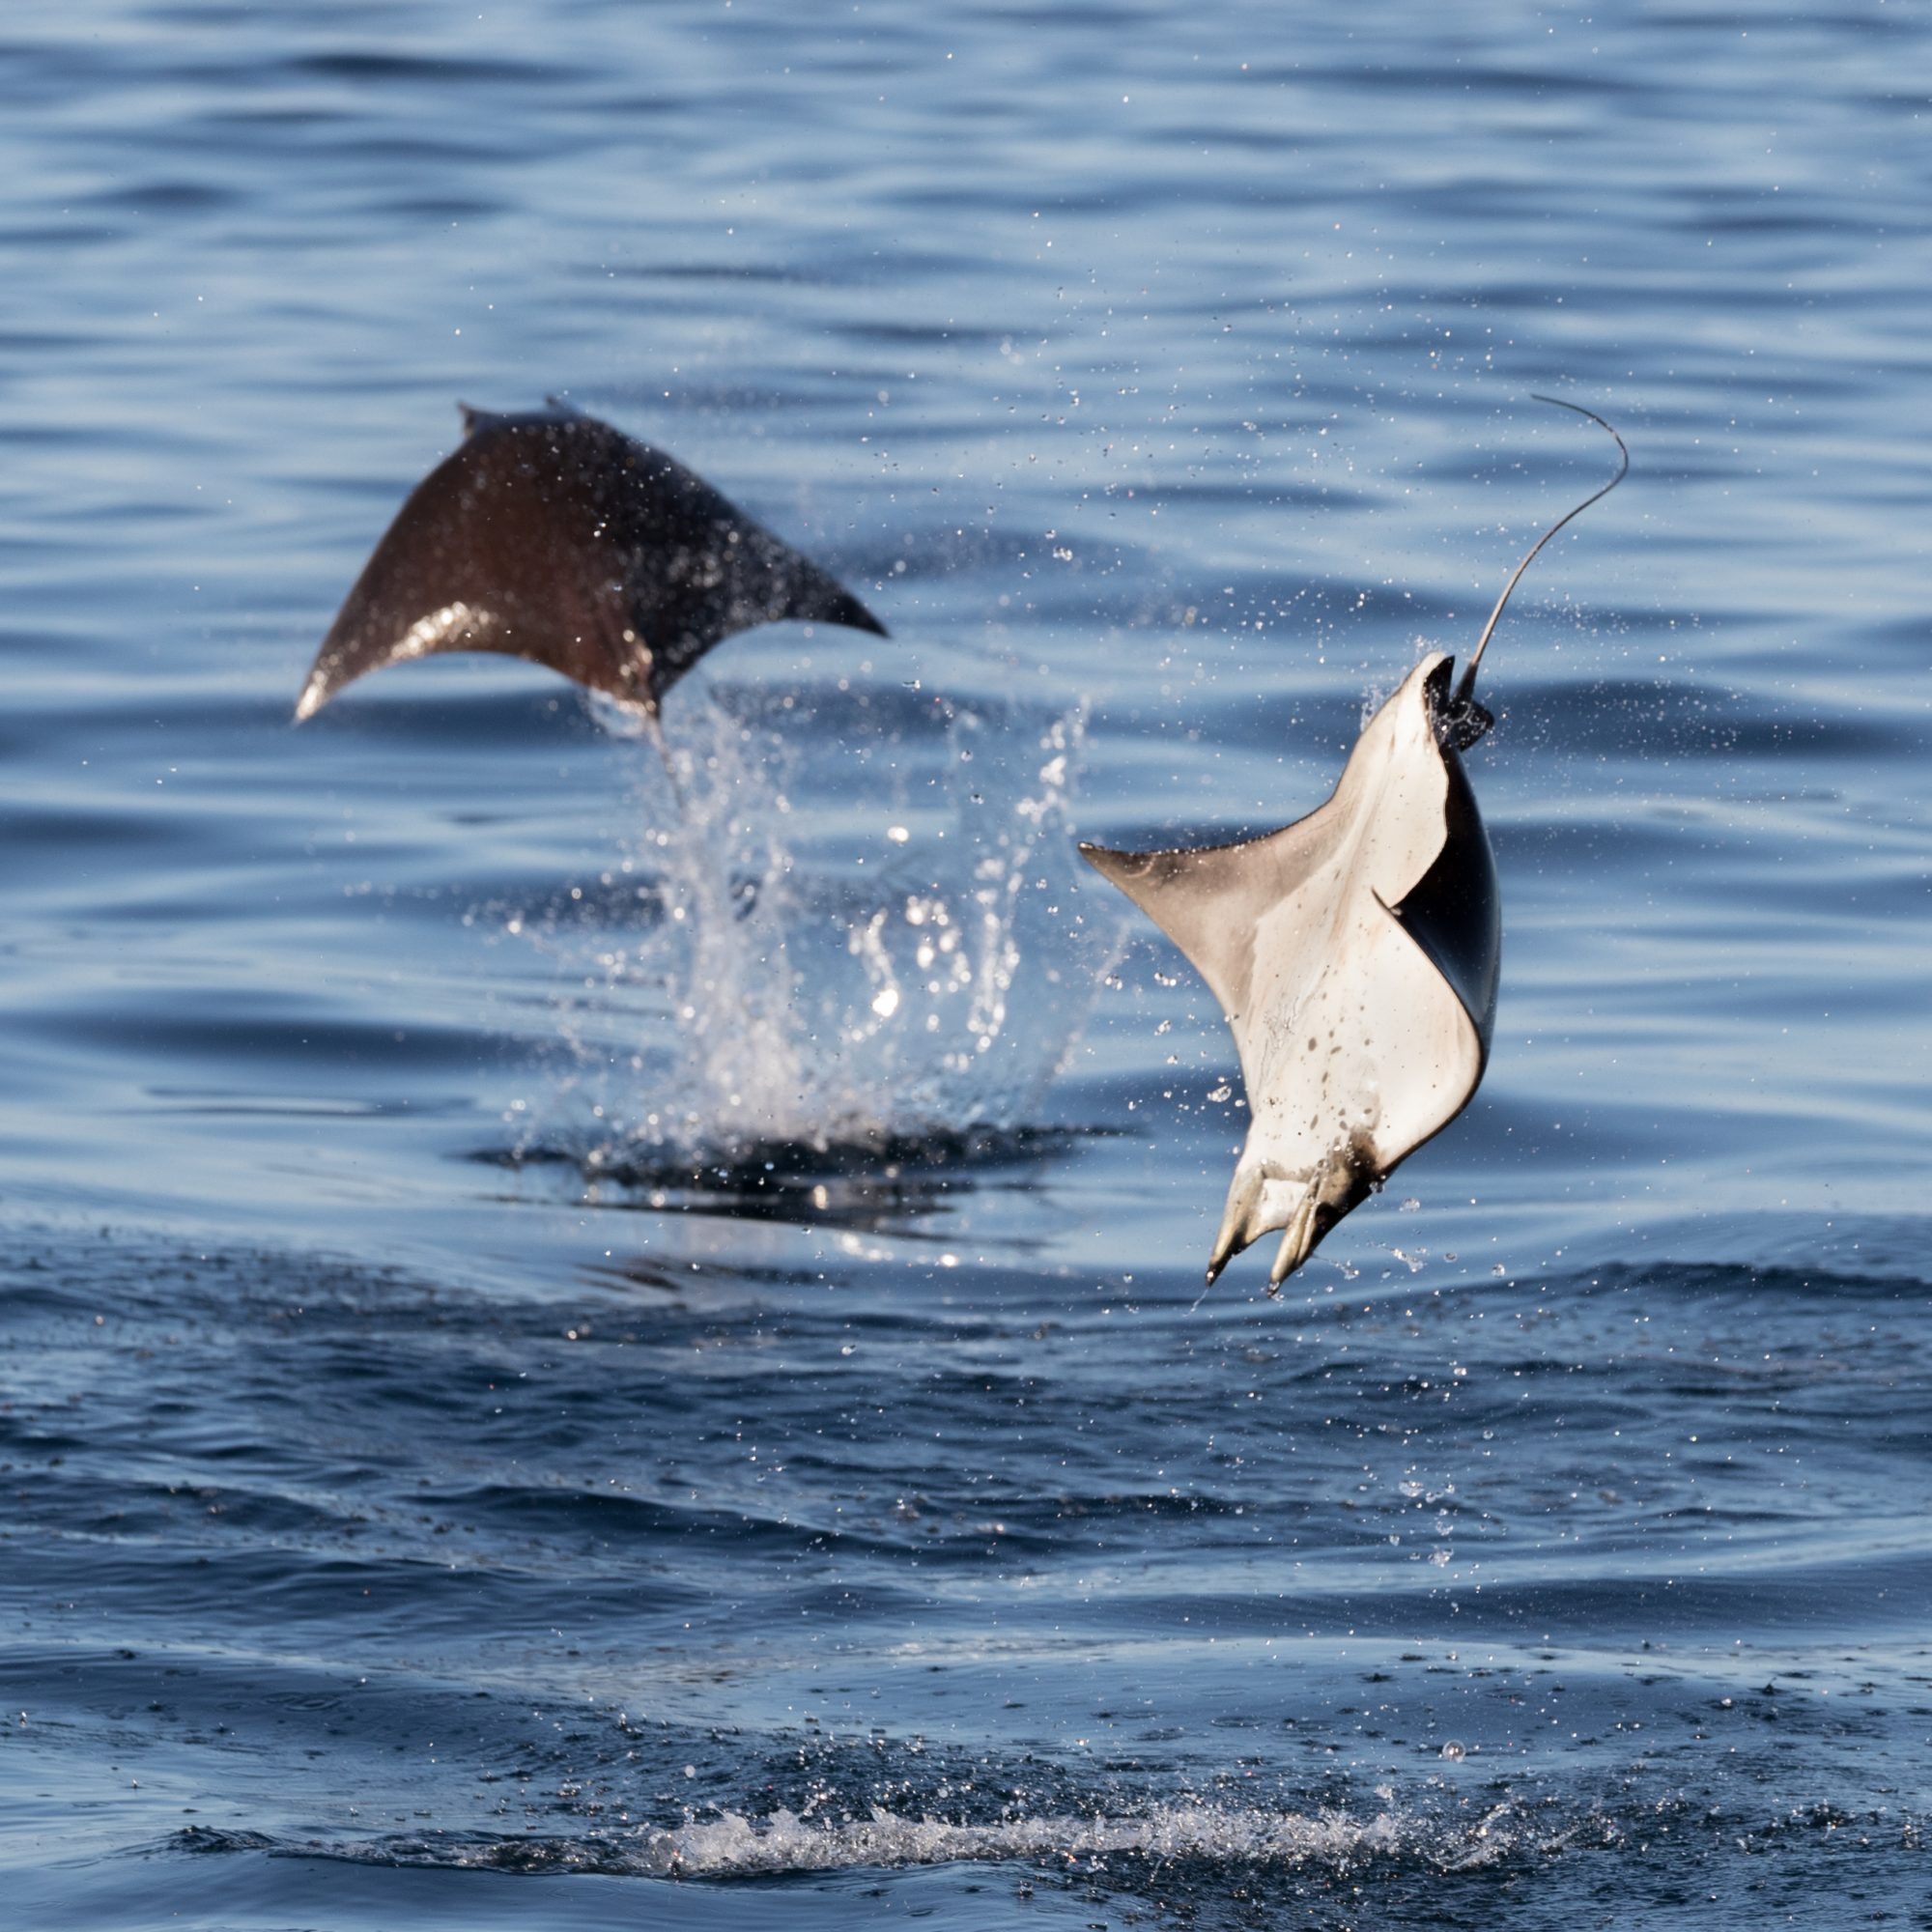 Leaping Munk’s Mobula Rays – Sea of Cortez, Mexico 2017